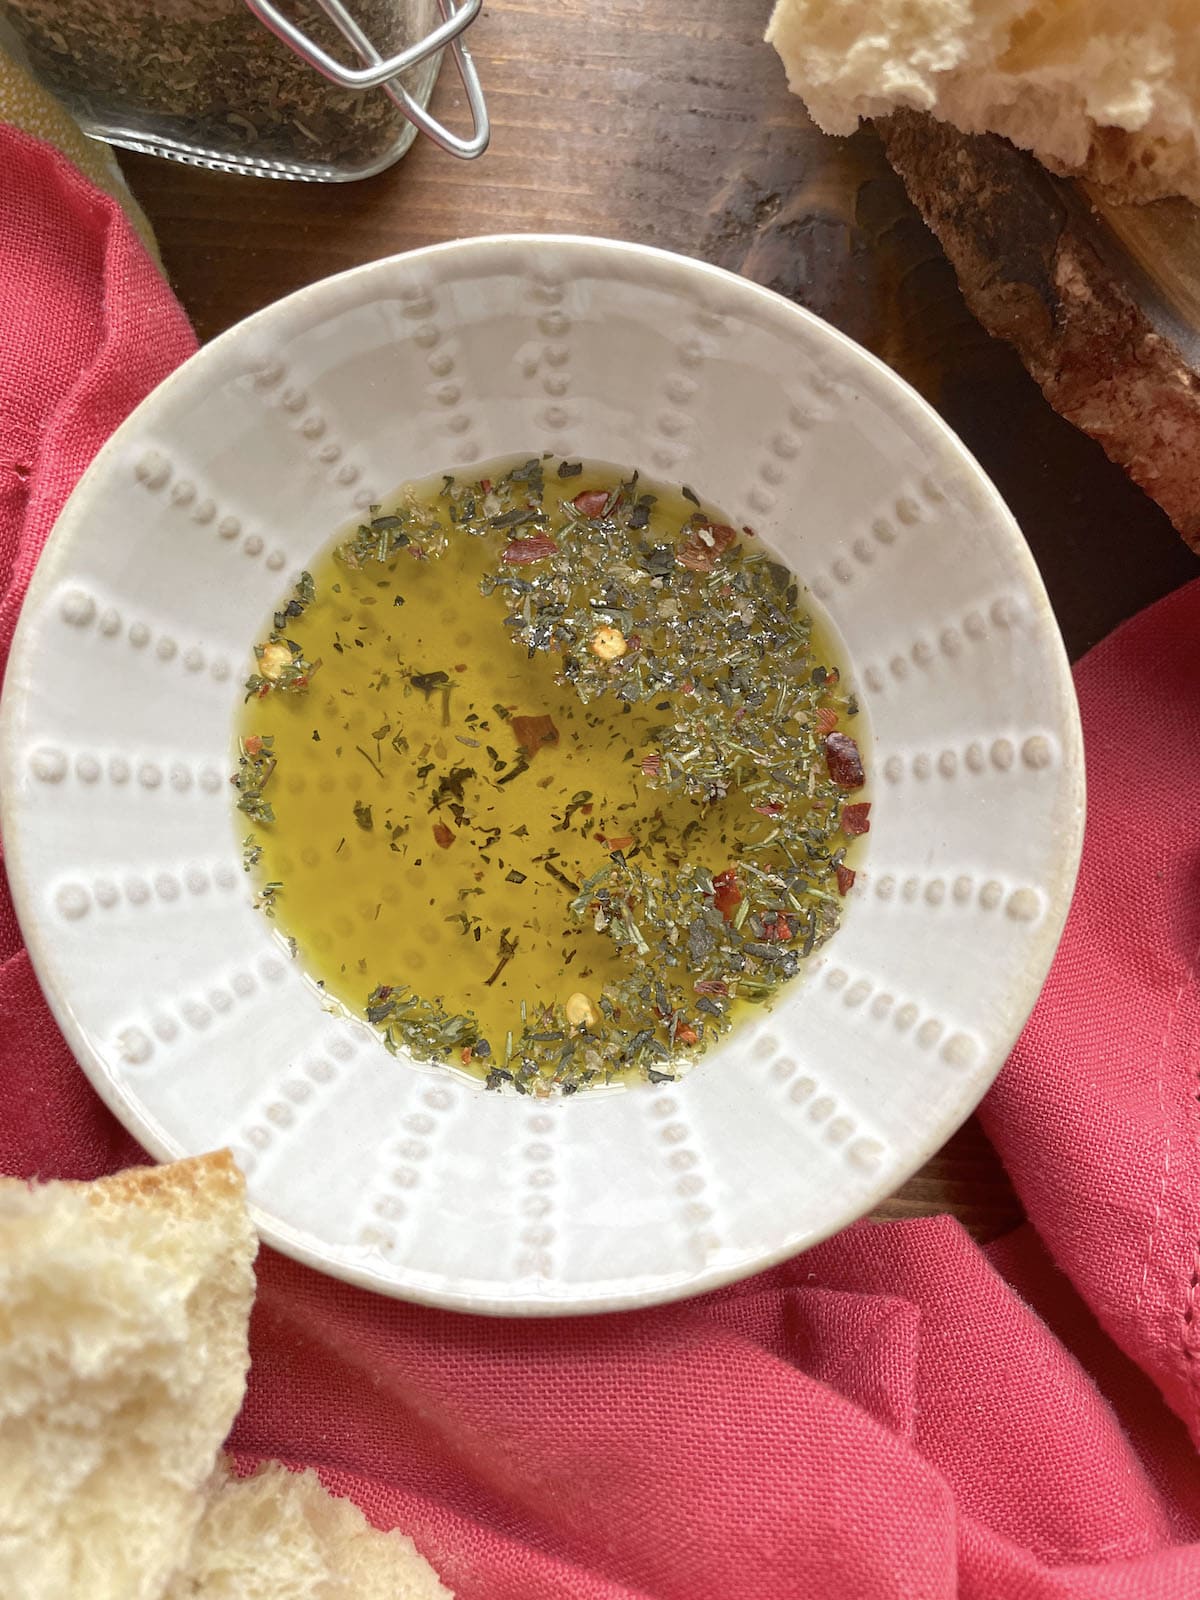 A small bowl of olive oil with Italian seasoning in it and torn pieces of bread around it.